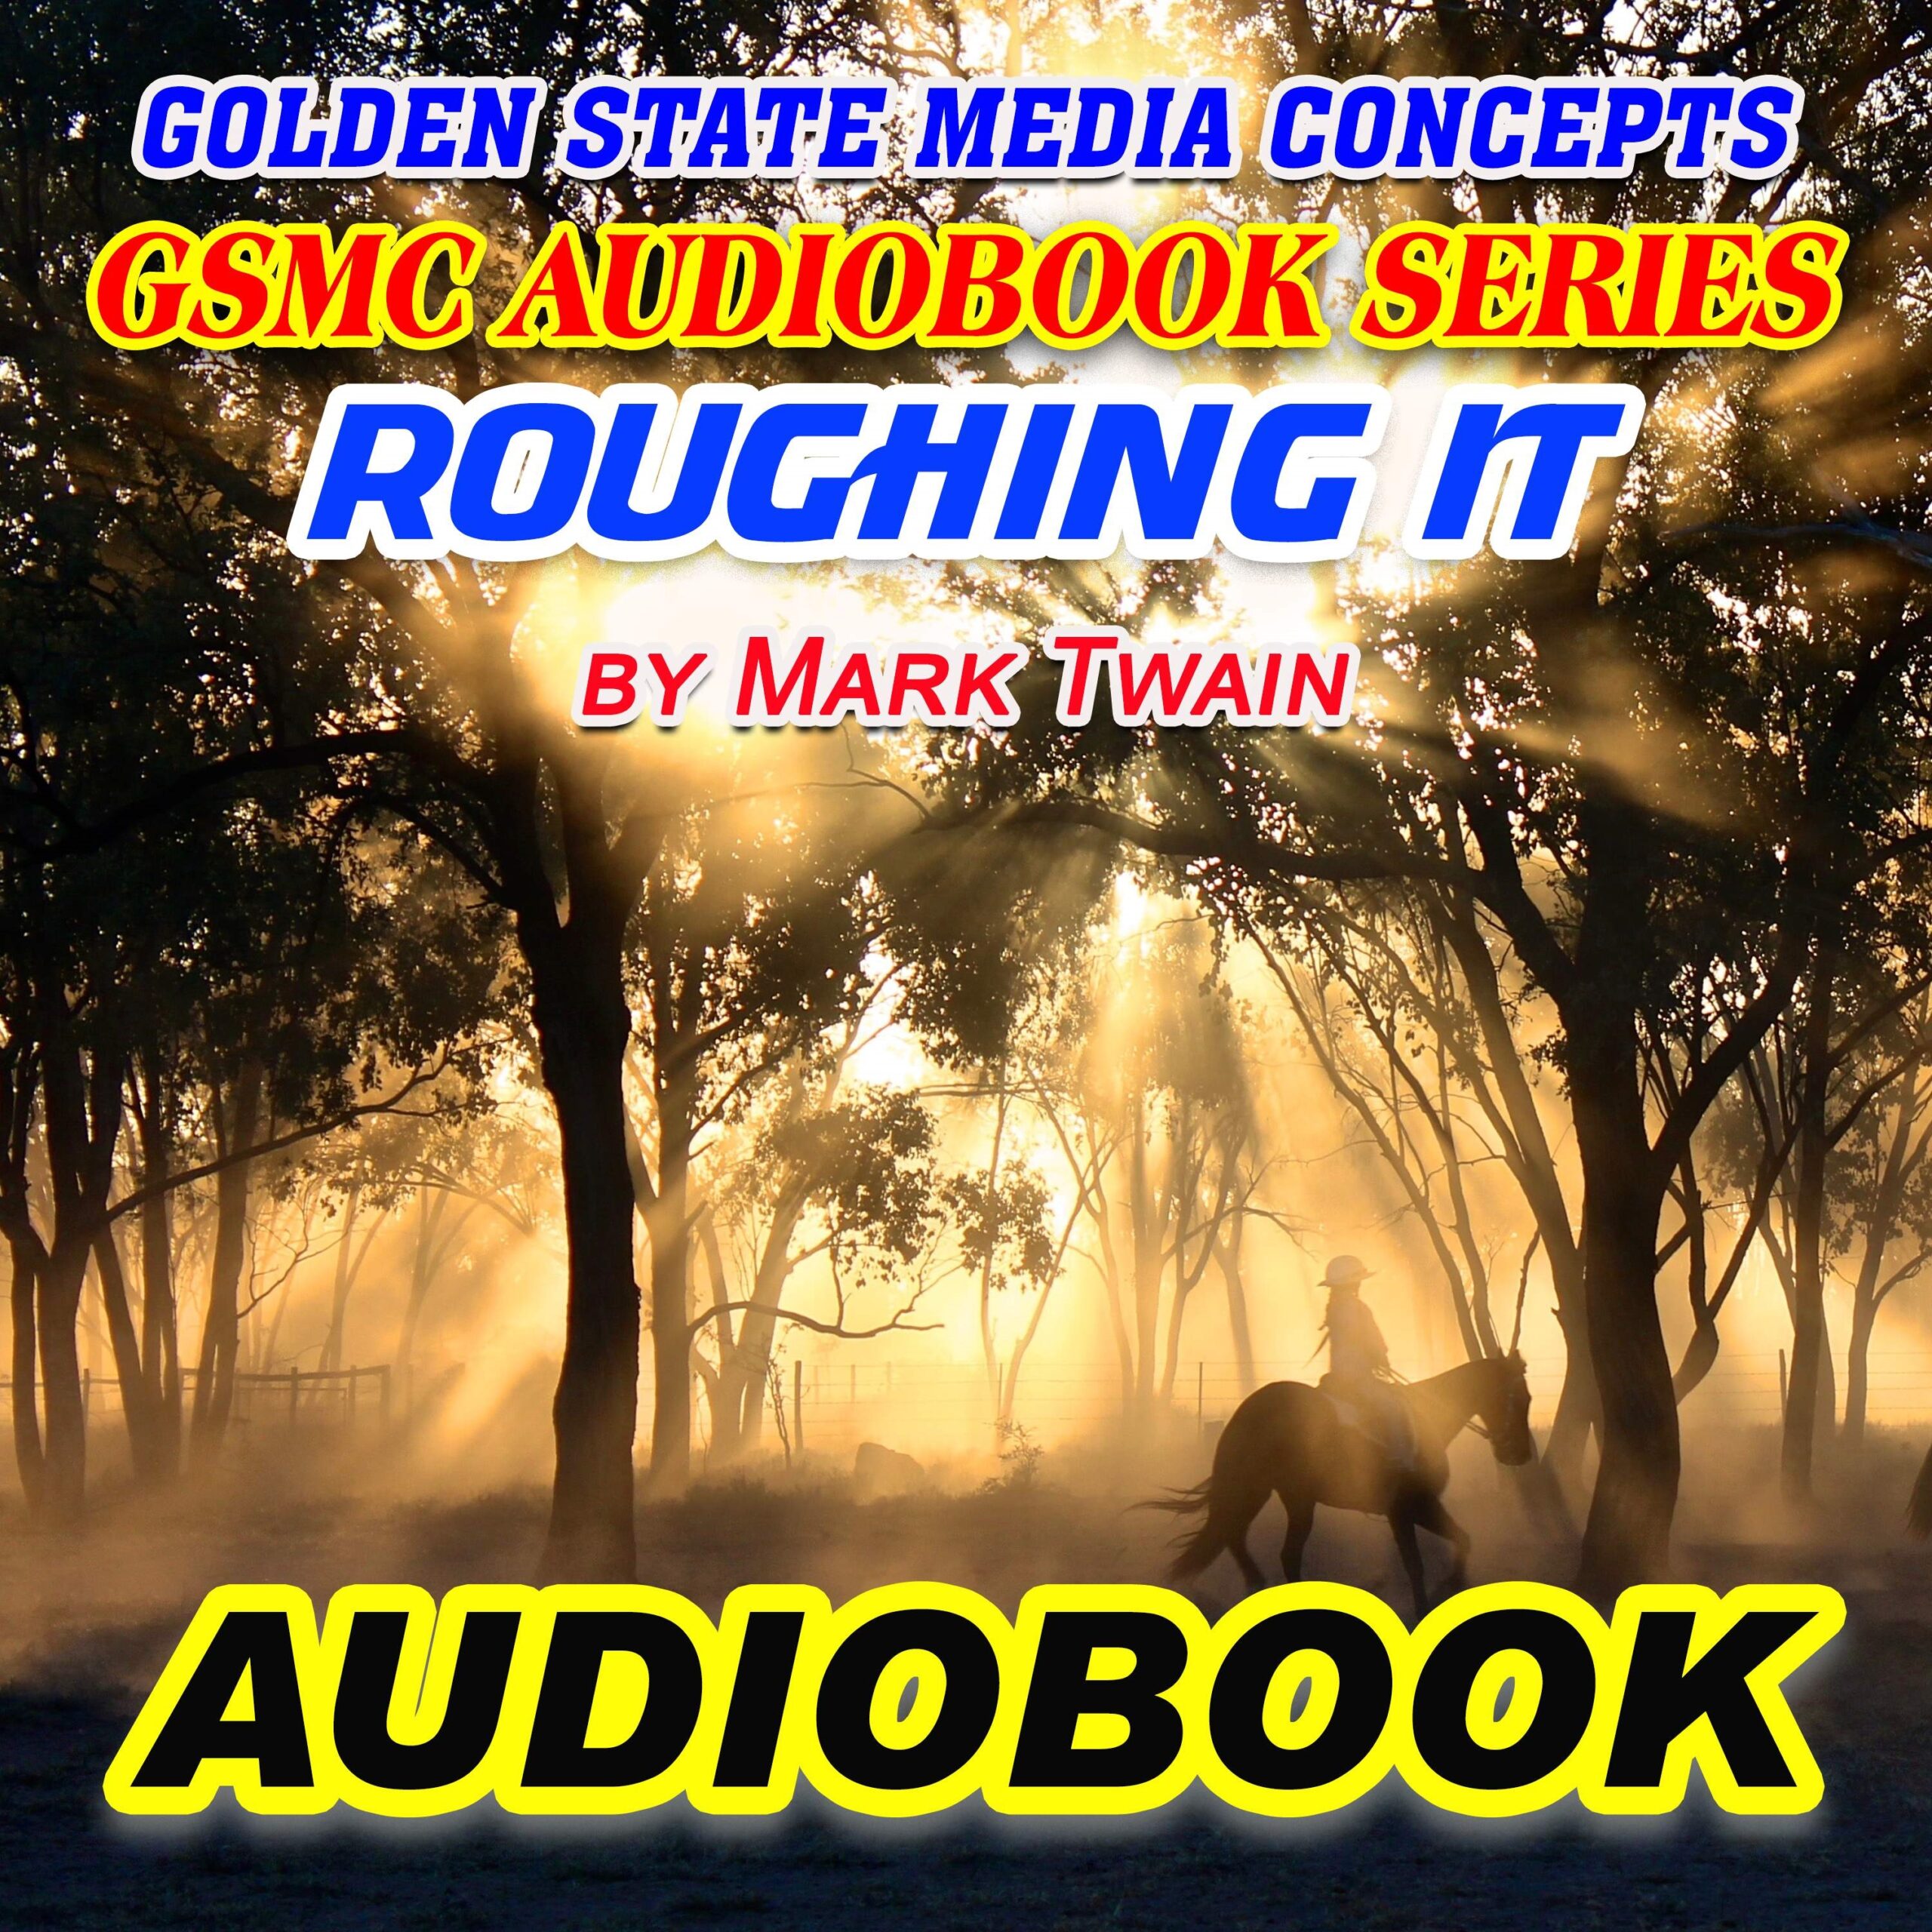 GSMC Audiobook Series: Roughing It by Mark Twain